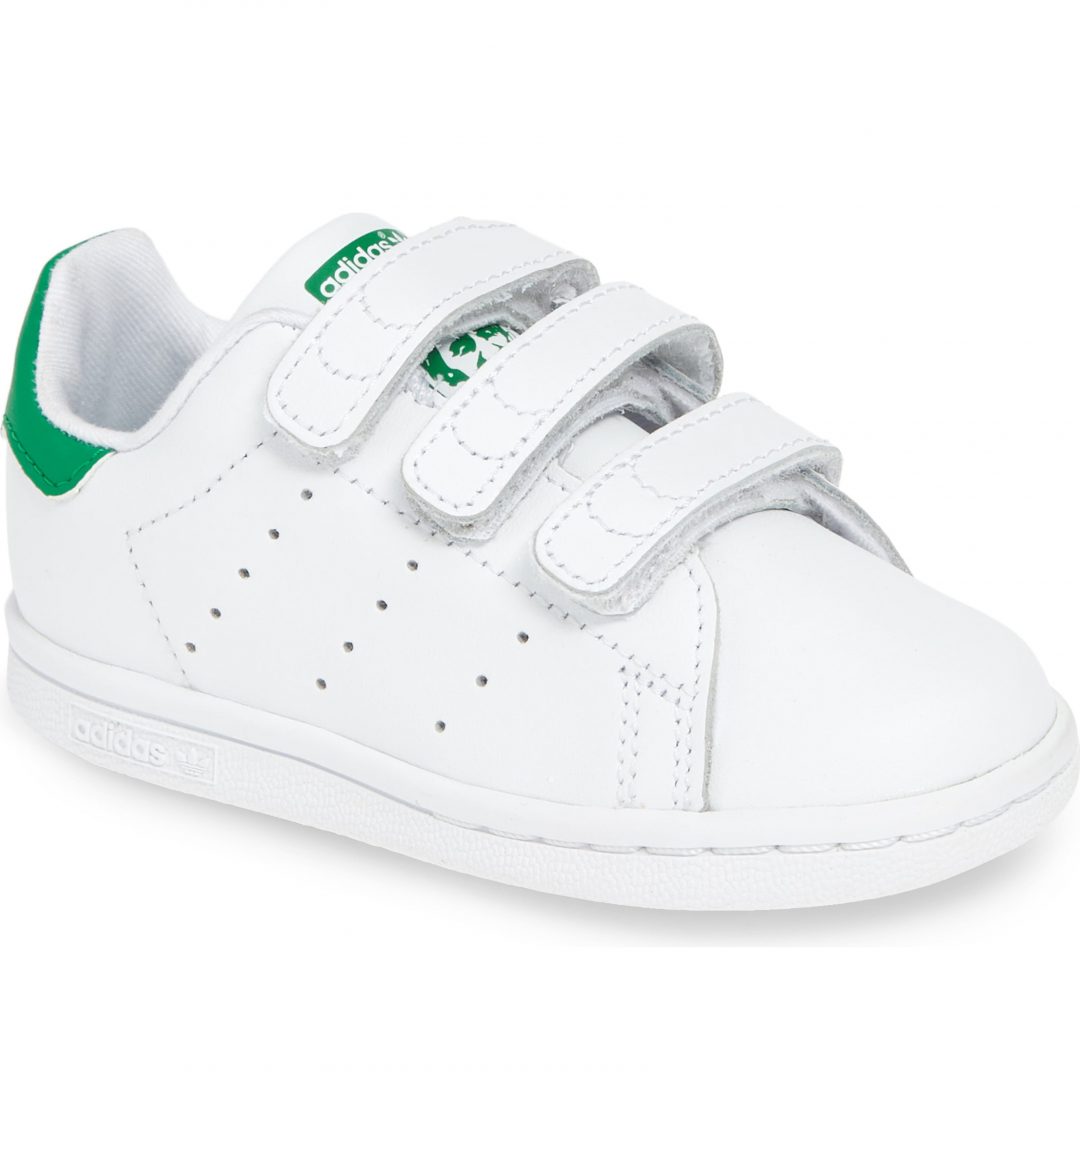 Hot trend alert: Adidas Stan Smiths are back, and it's 1972 all over again!